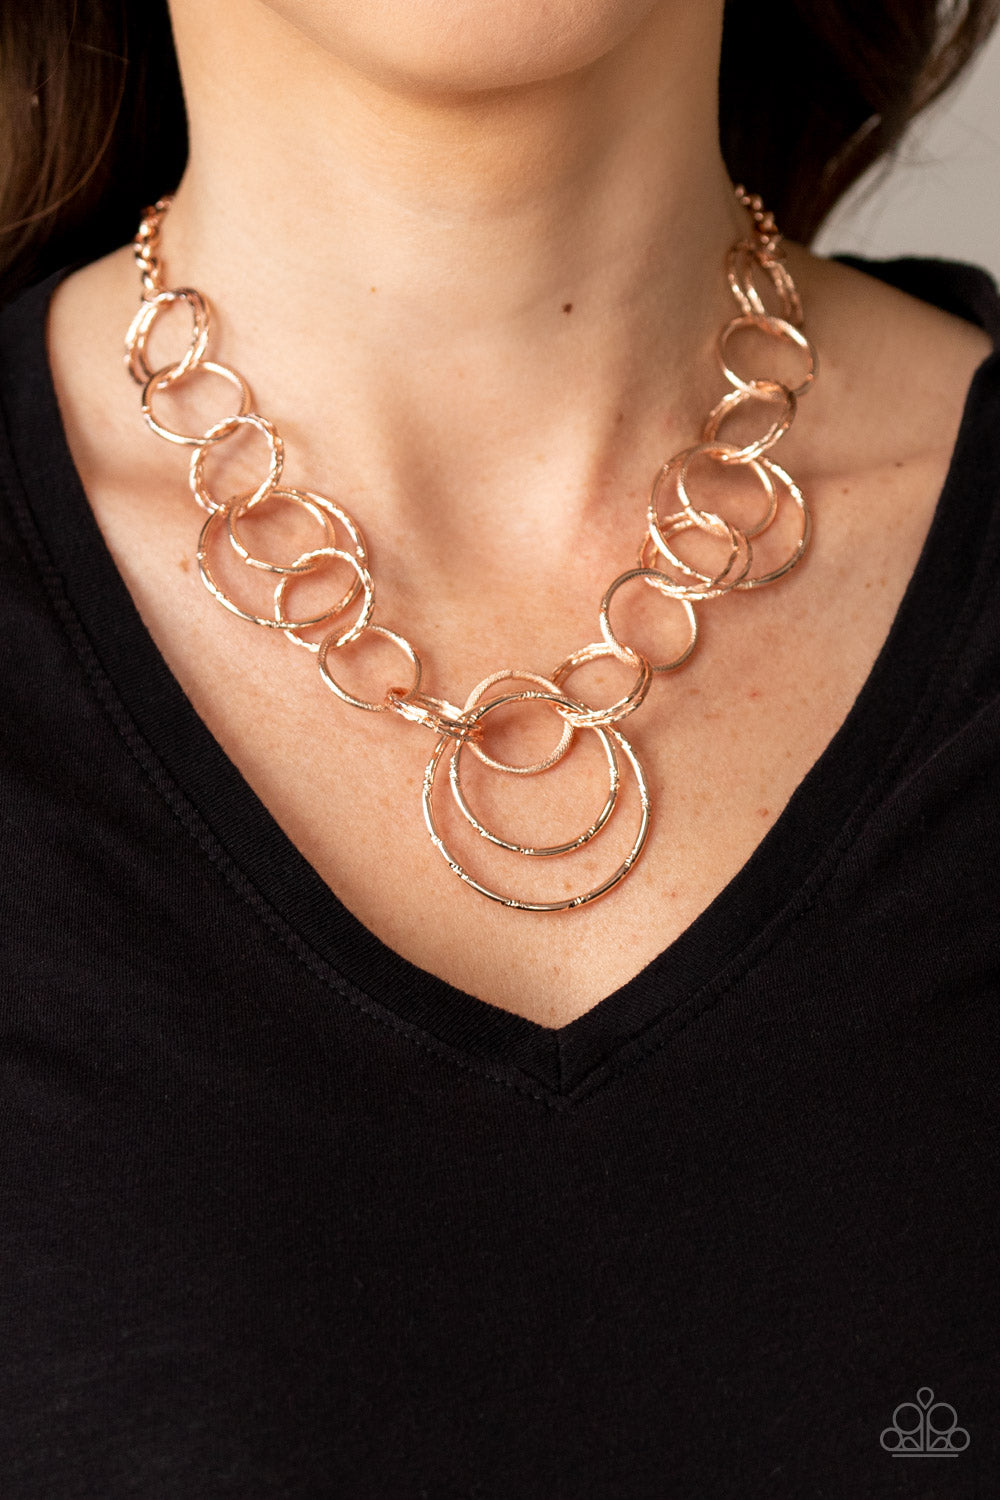 Ringing Relic Rose Gold Paparazzi Necklace Cashmere Pink Jewels